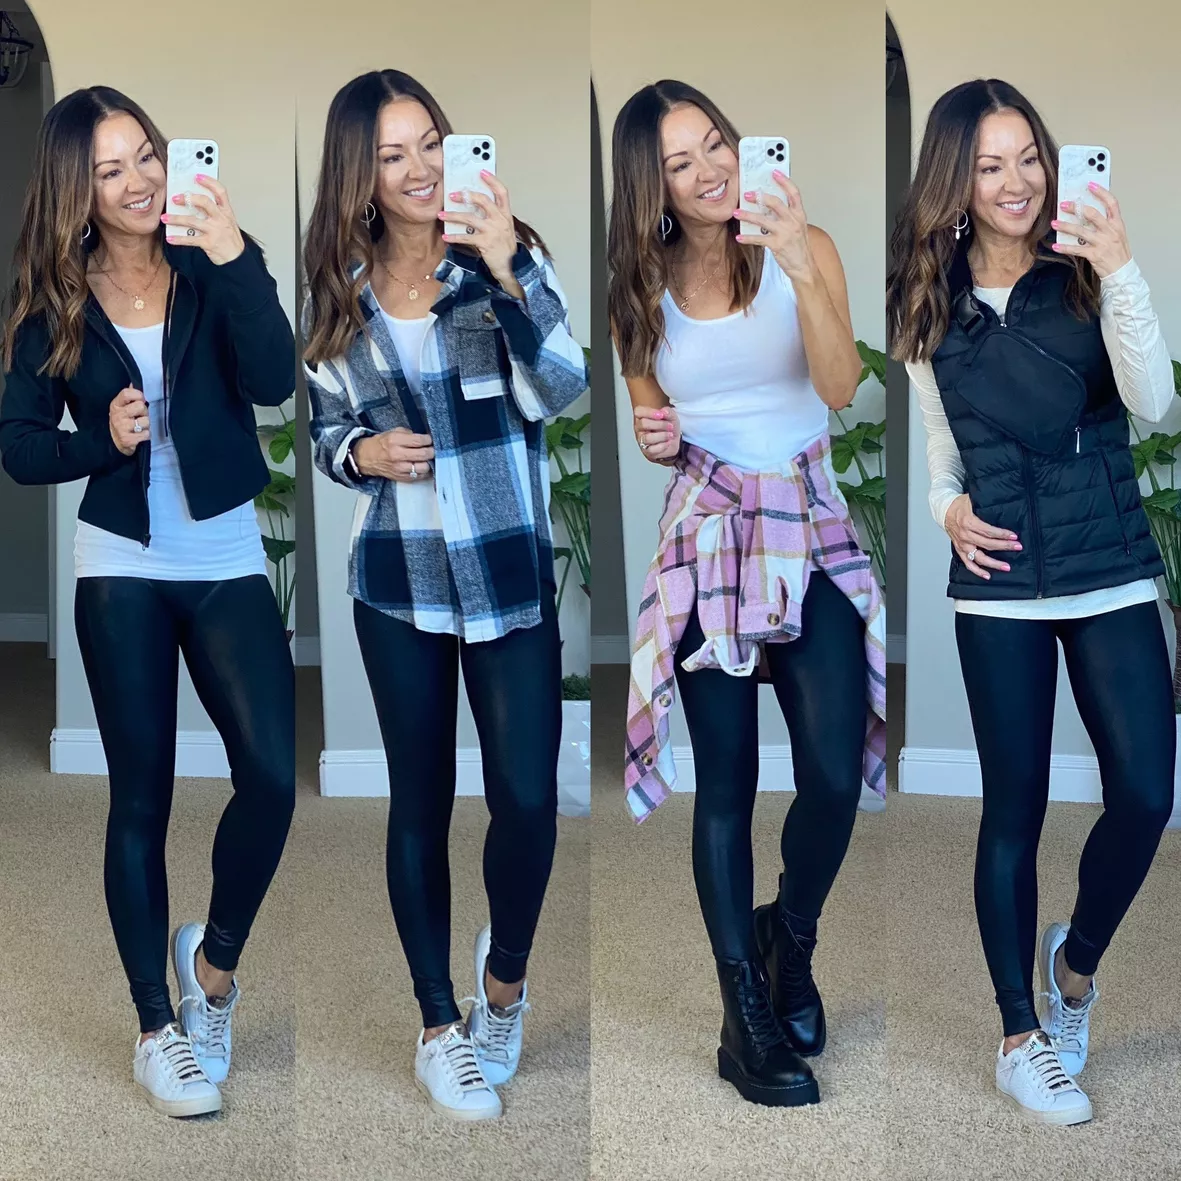 15 Cute Outfits With Leggings For Teens That Are Trendy. - HONESTLYBECCA   Outfits with leggings, Cute going out outfits, Leather pants outfit going  out